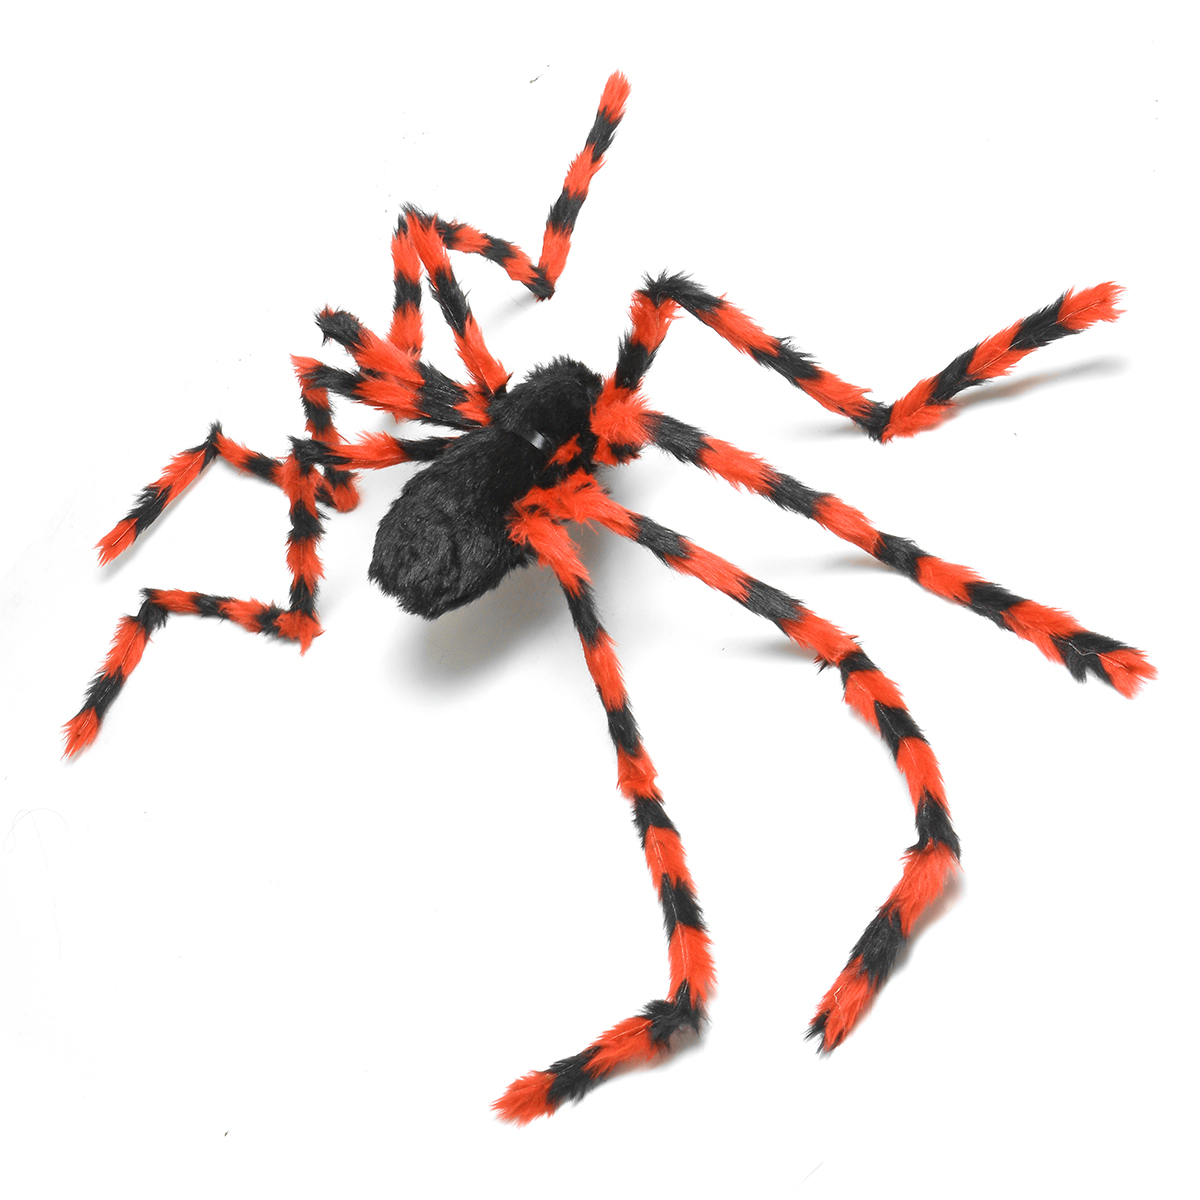 150cm-Horrible-Giant-Furry-Spider-Decorations-Halloween-Haunted-House-Prop-Gift-1589939-5